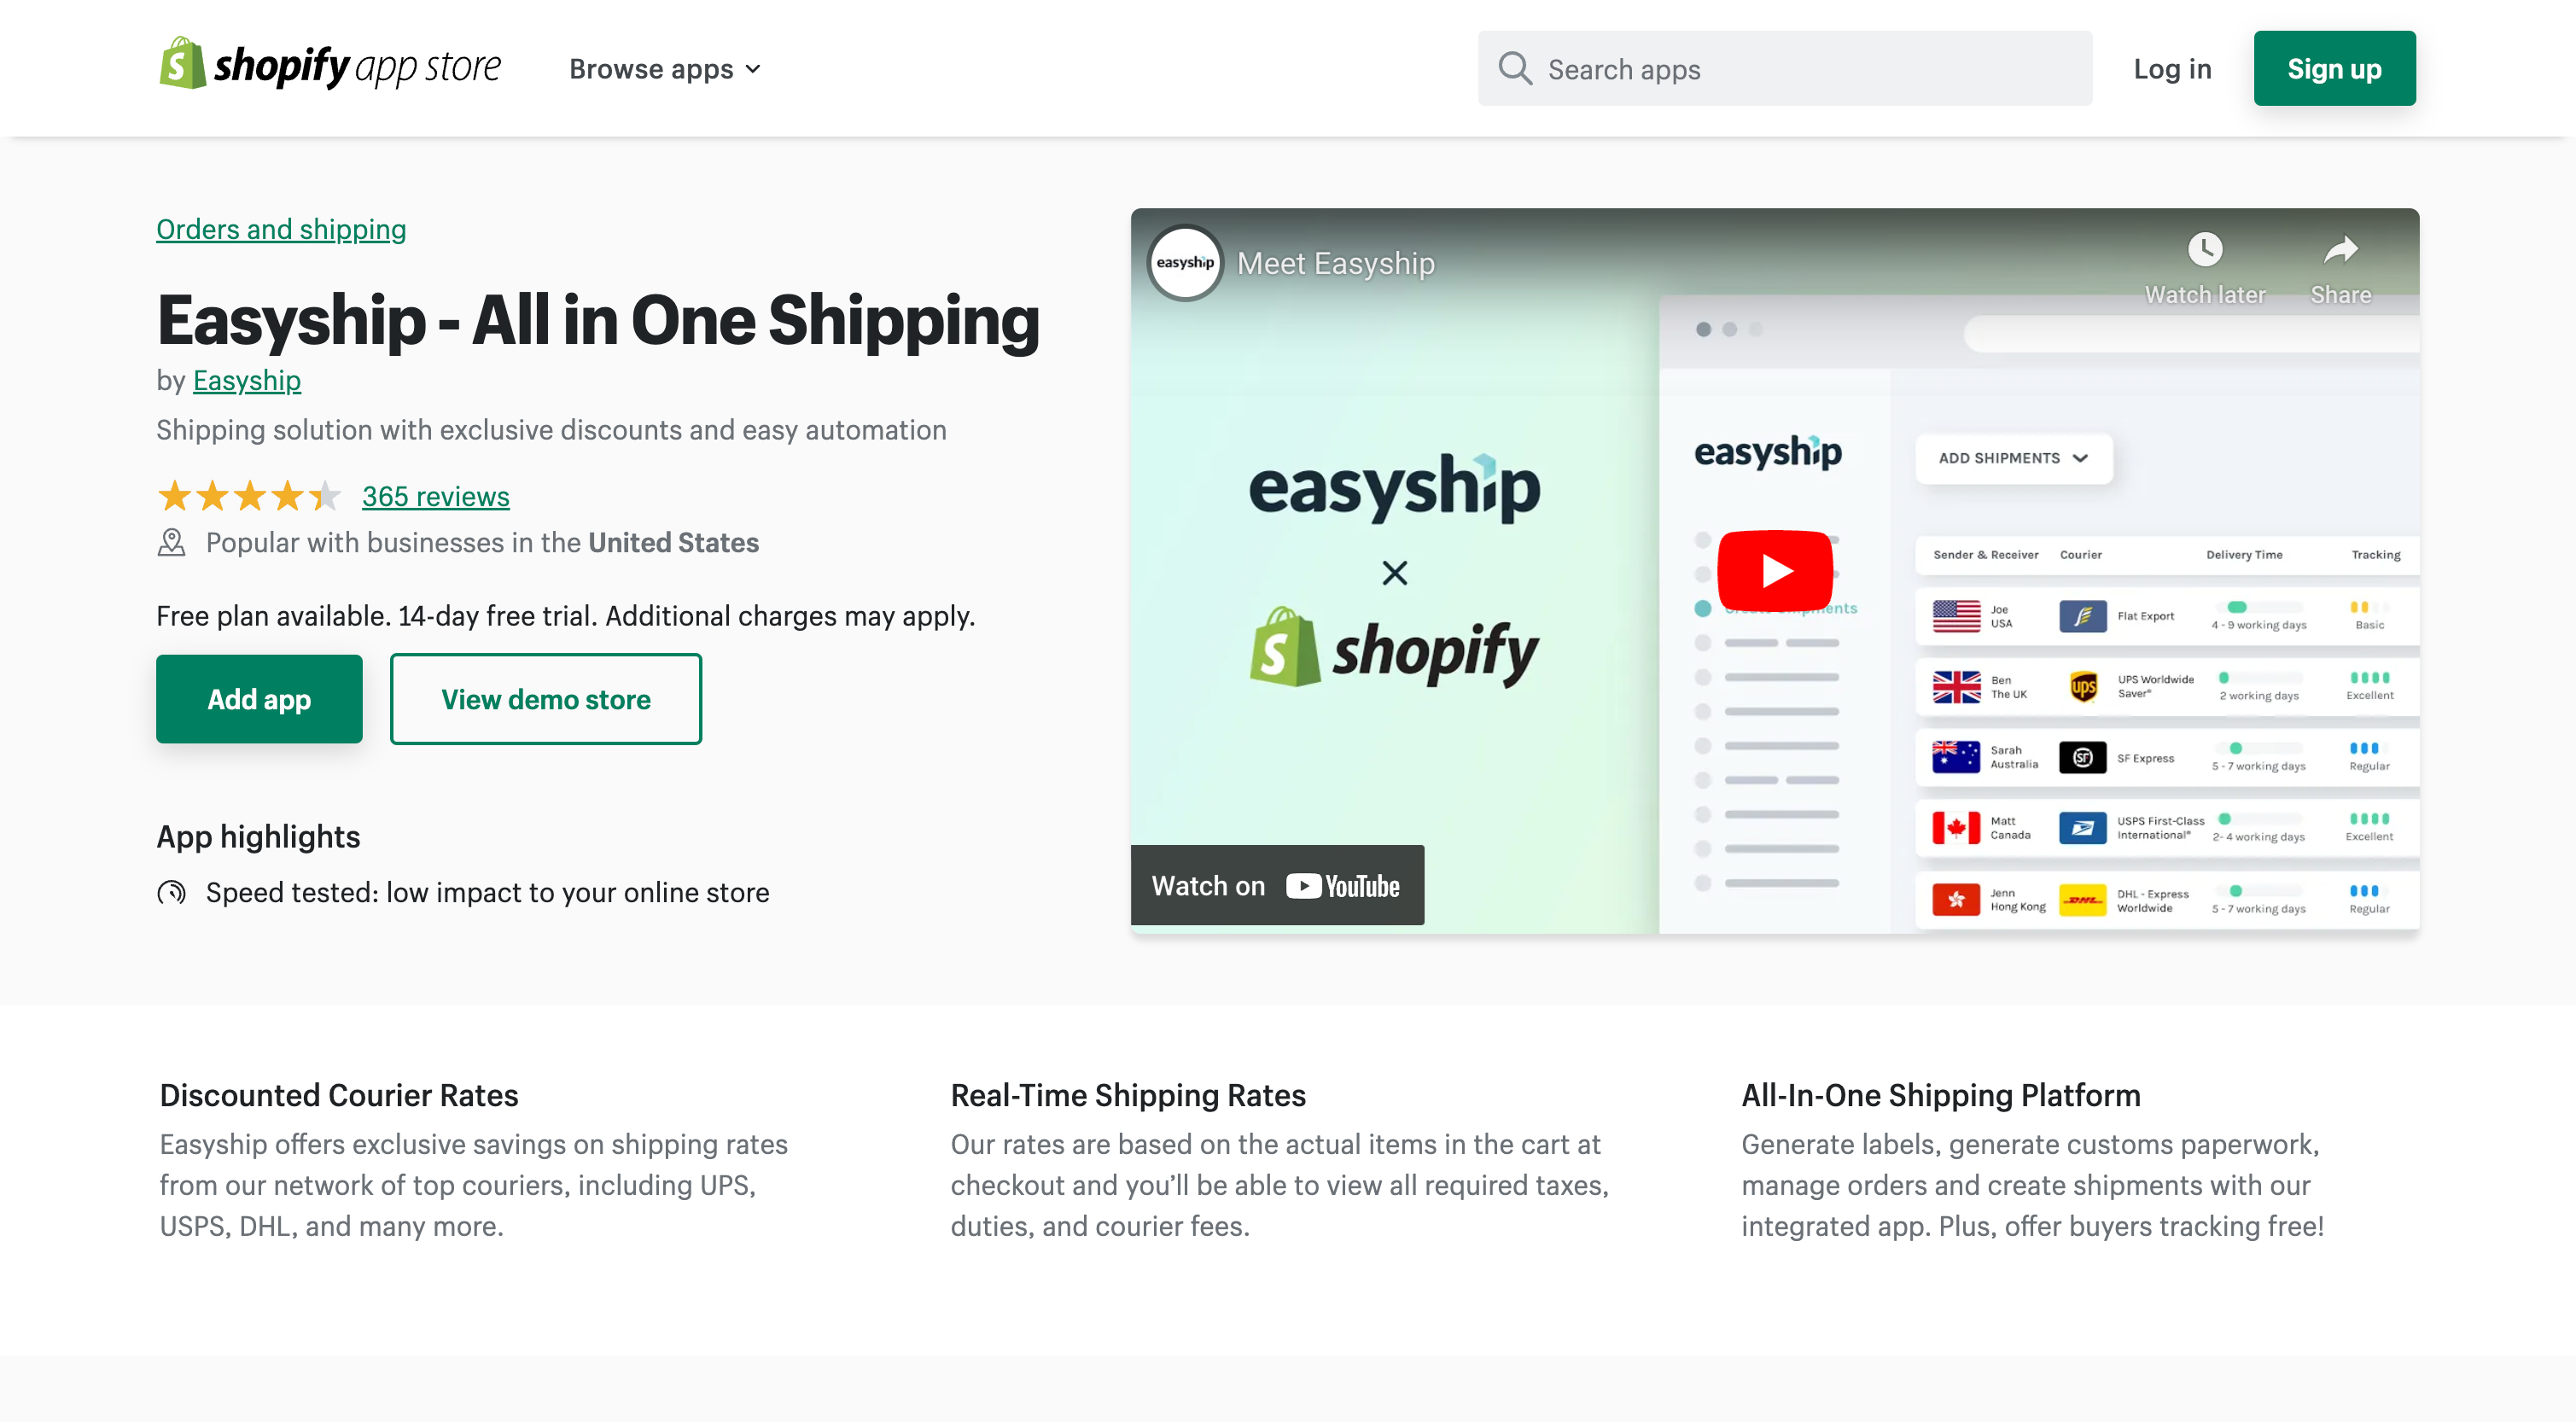 Easyship: All in One Shipping - Shipping solution with exclusive discounts and easy automation